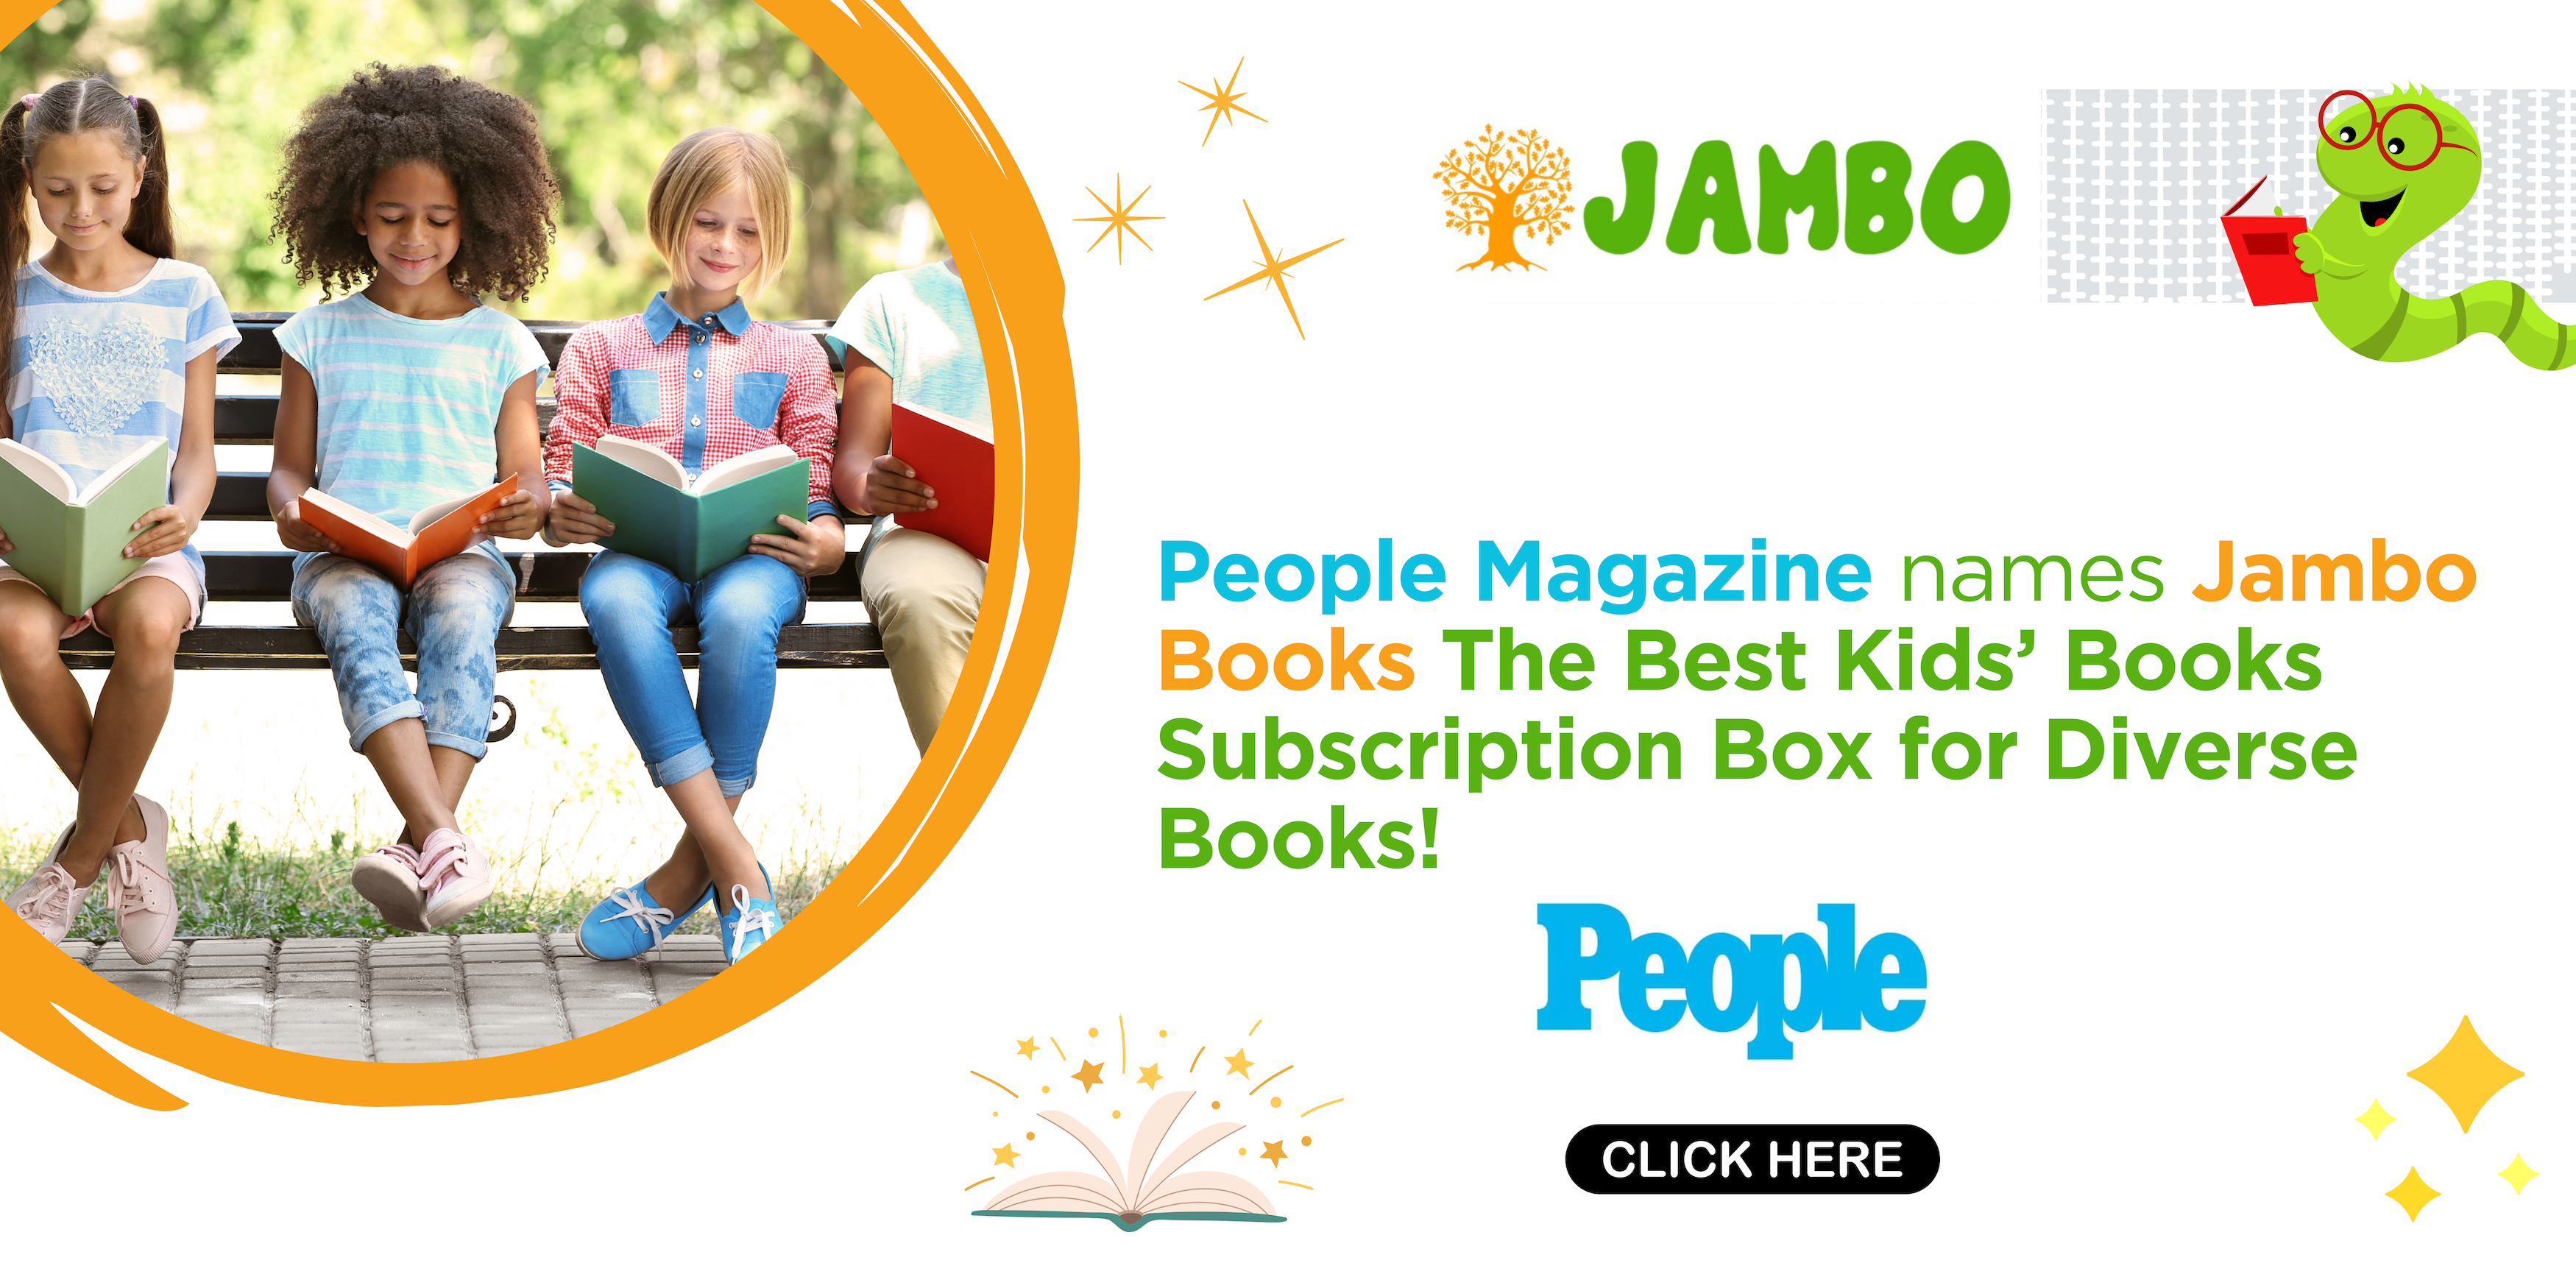 92-425-people-magazine-names-jambo-books-the-best-kids-books-subscription-box-for-d-17195697796936.png